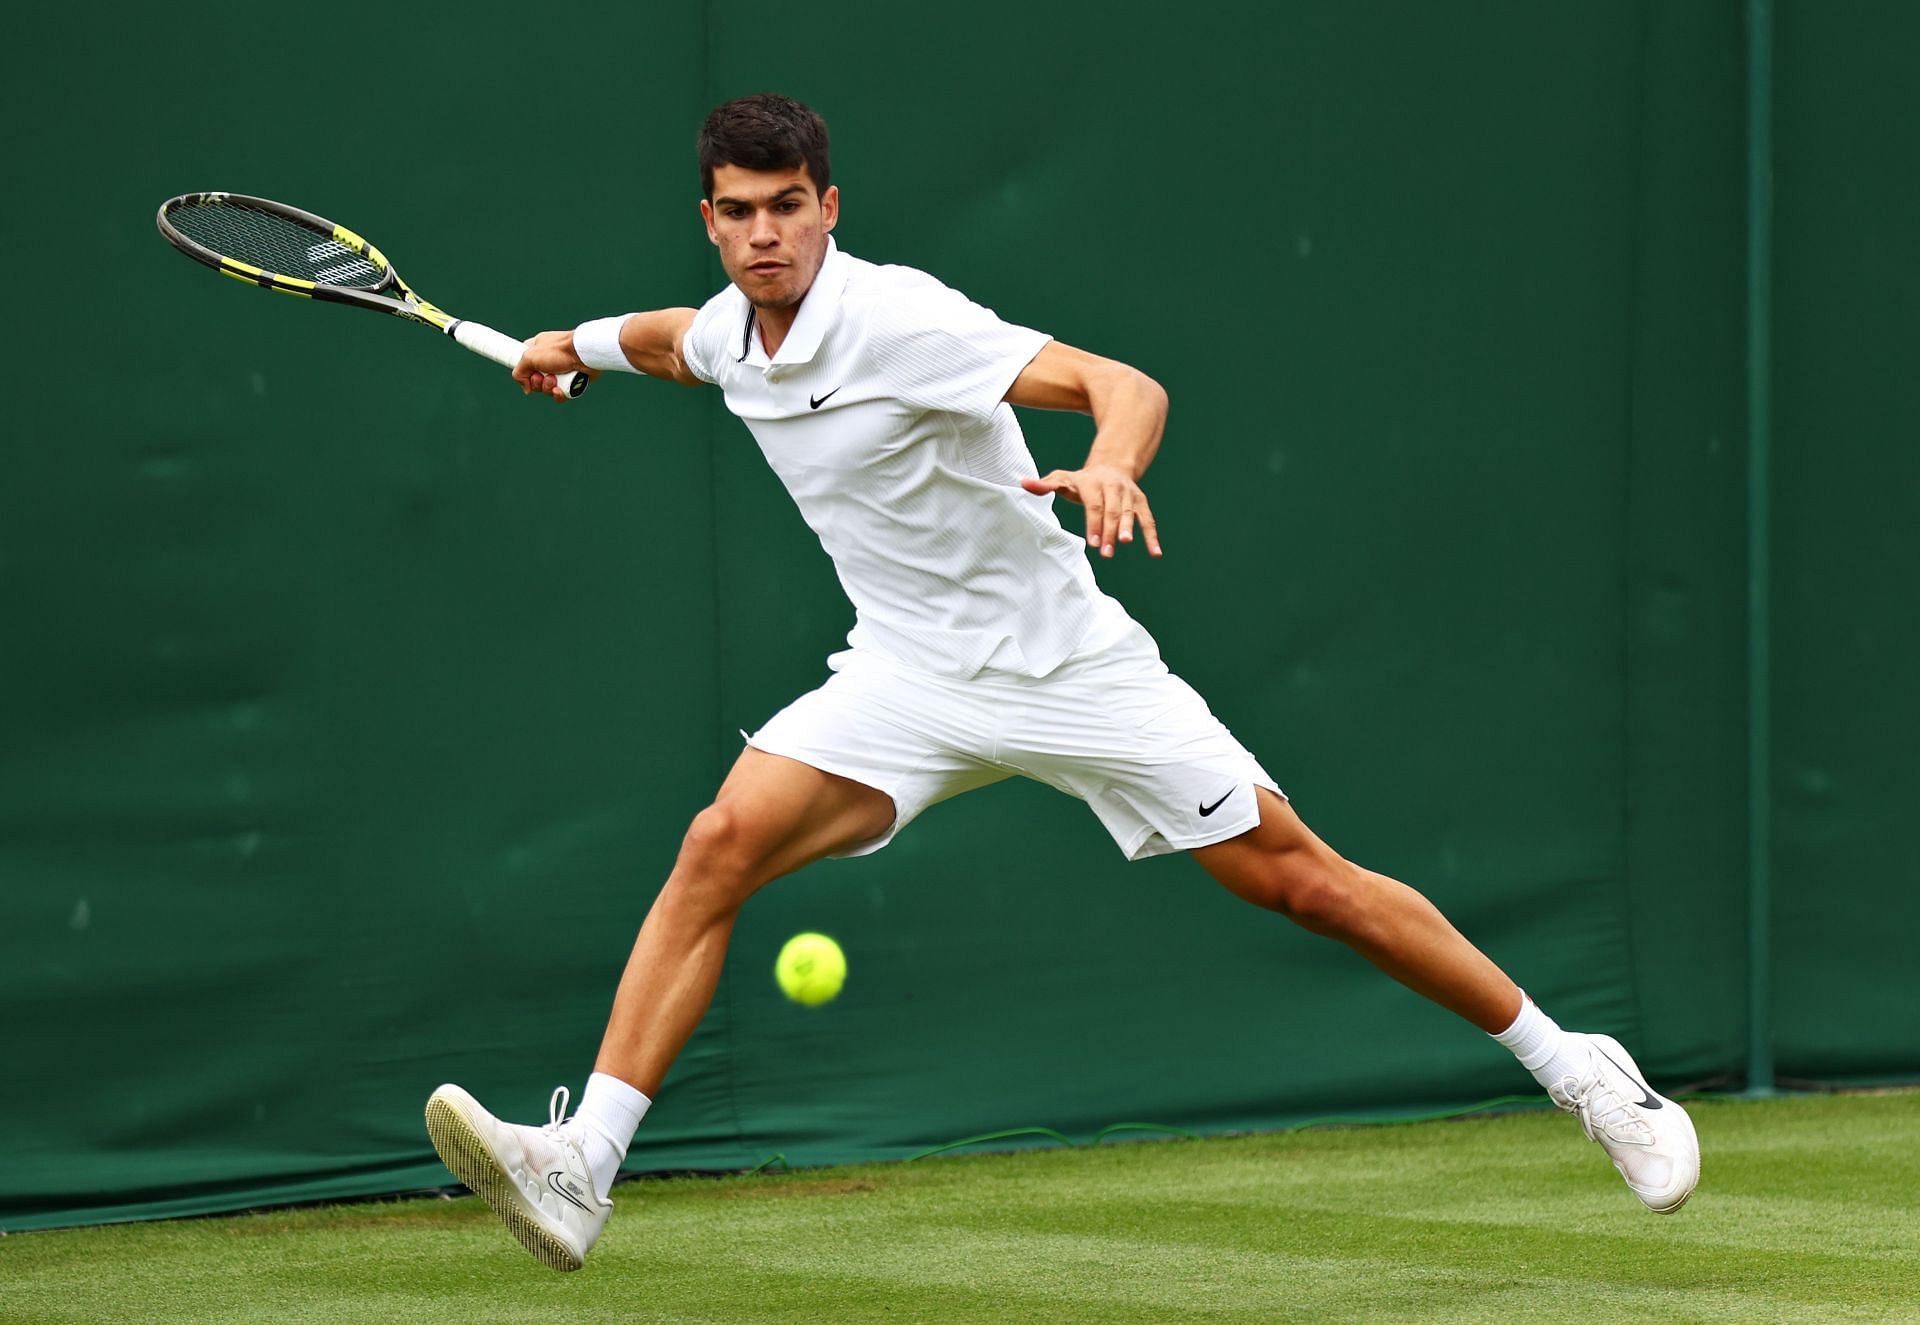 The Spaniard in action at Wimbledon 2021.